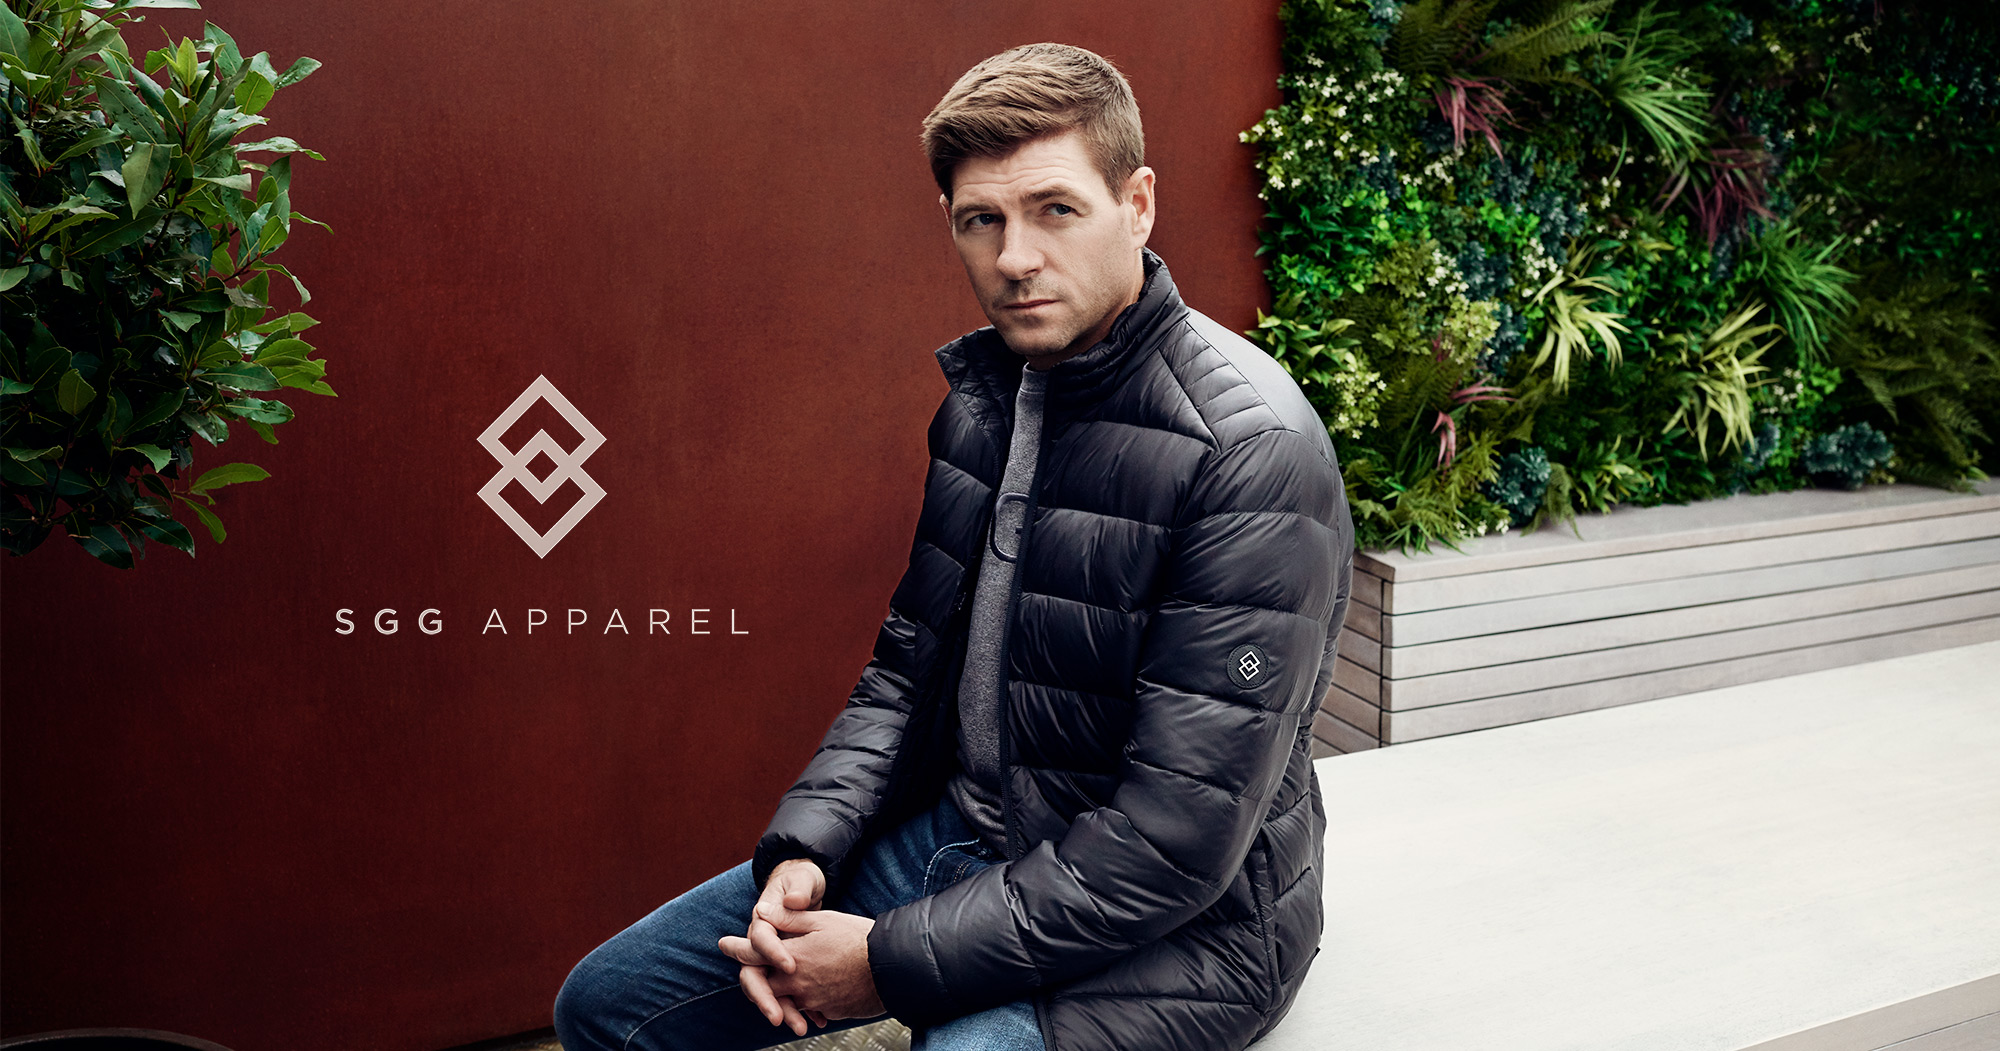 Steven-Gerrard-for-SGG-Apparel-by-Sane-Seven-campaign-Thumb-with-logo-2